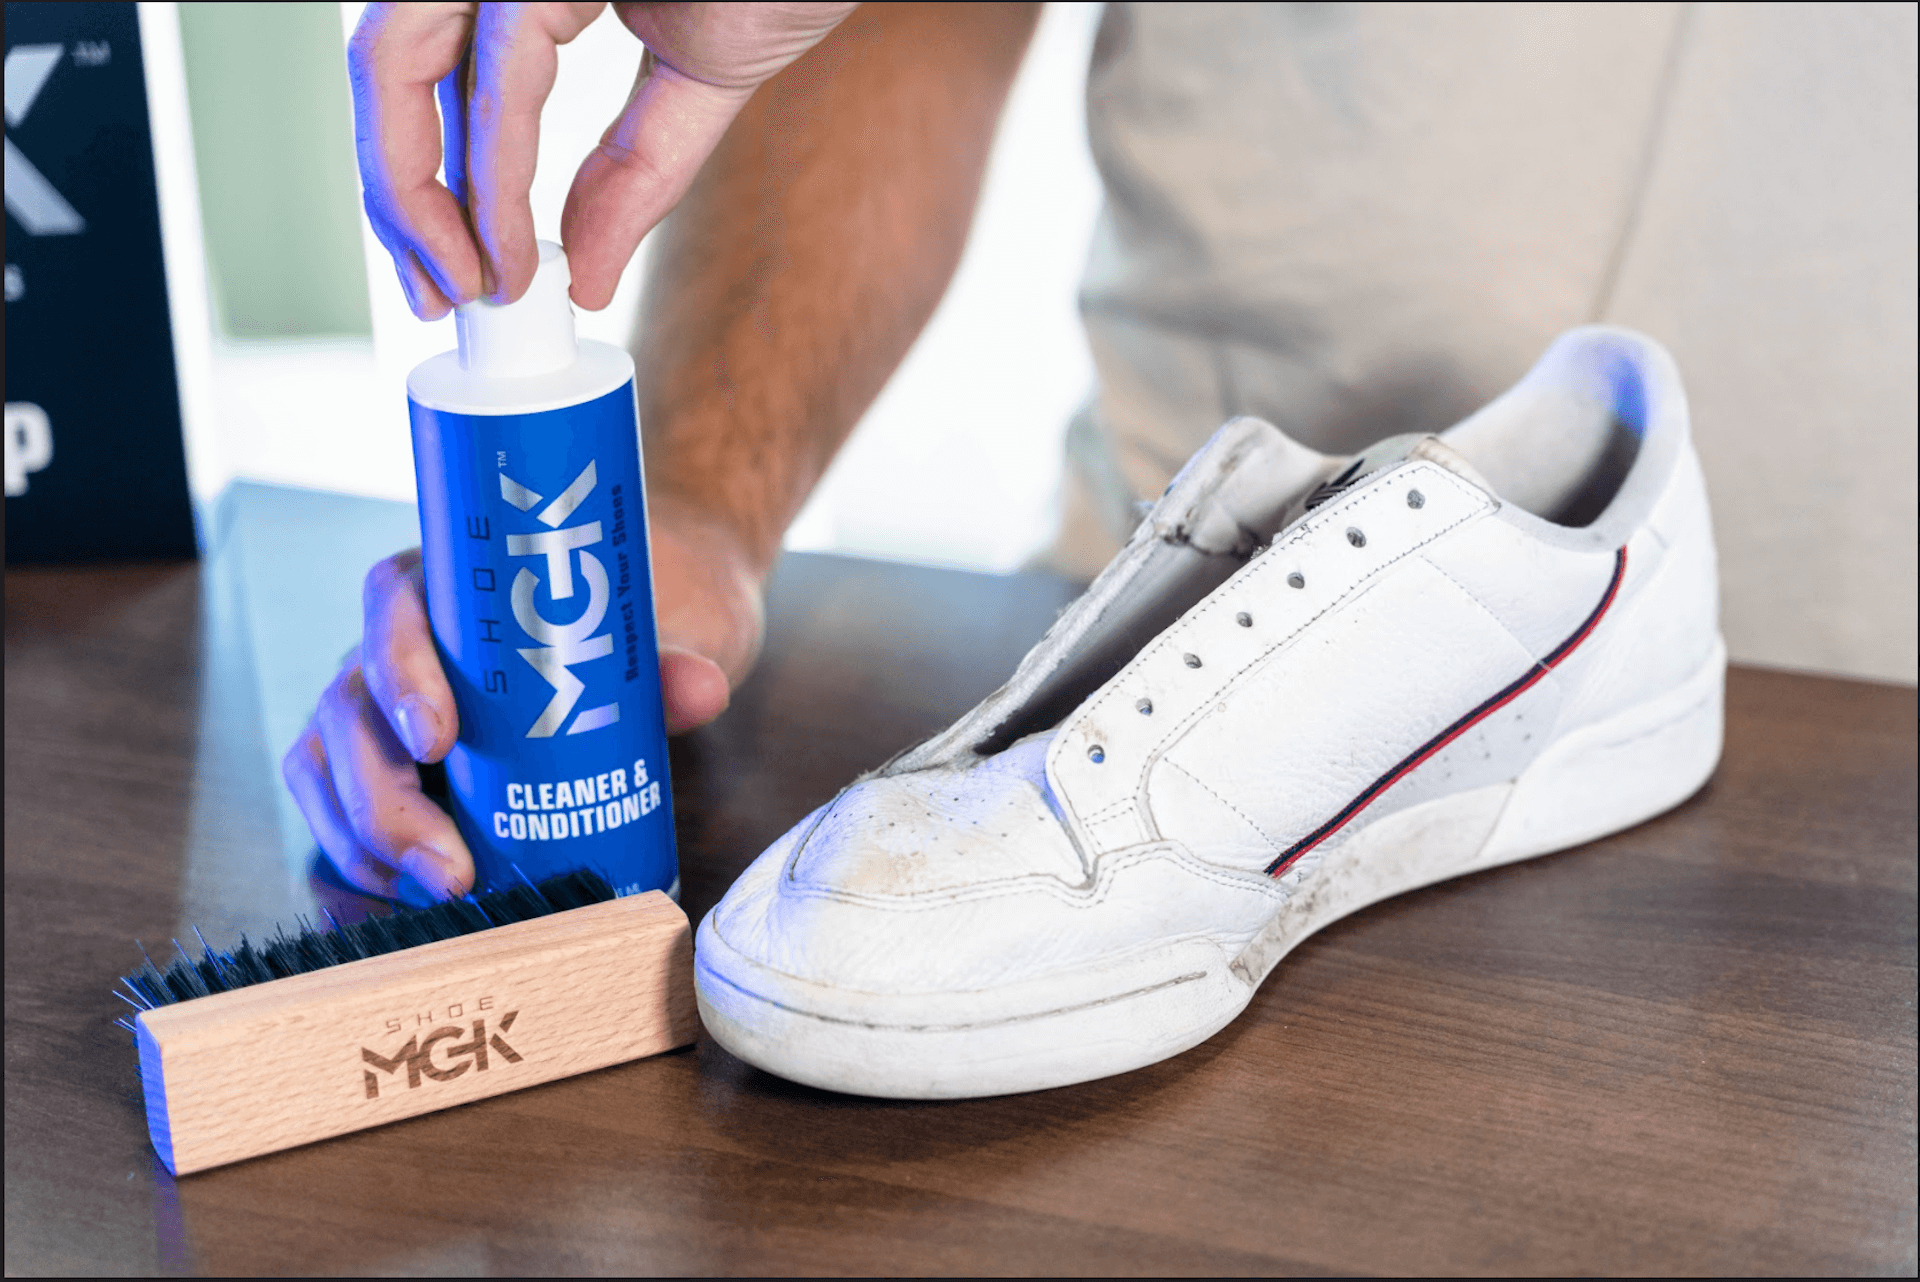 SHOE MGK - SHOE MGK Touch-Up is touch up paint for your